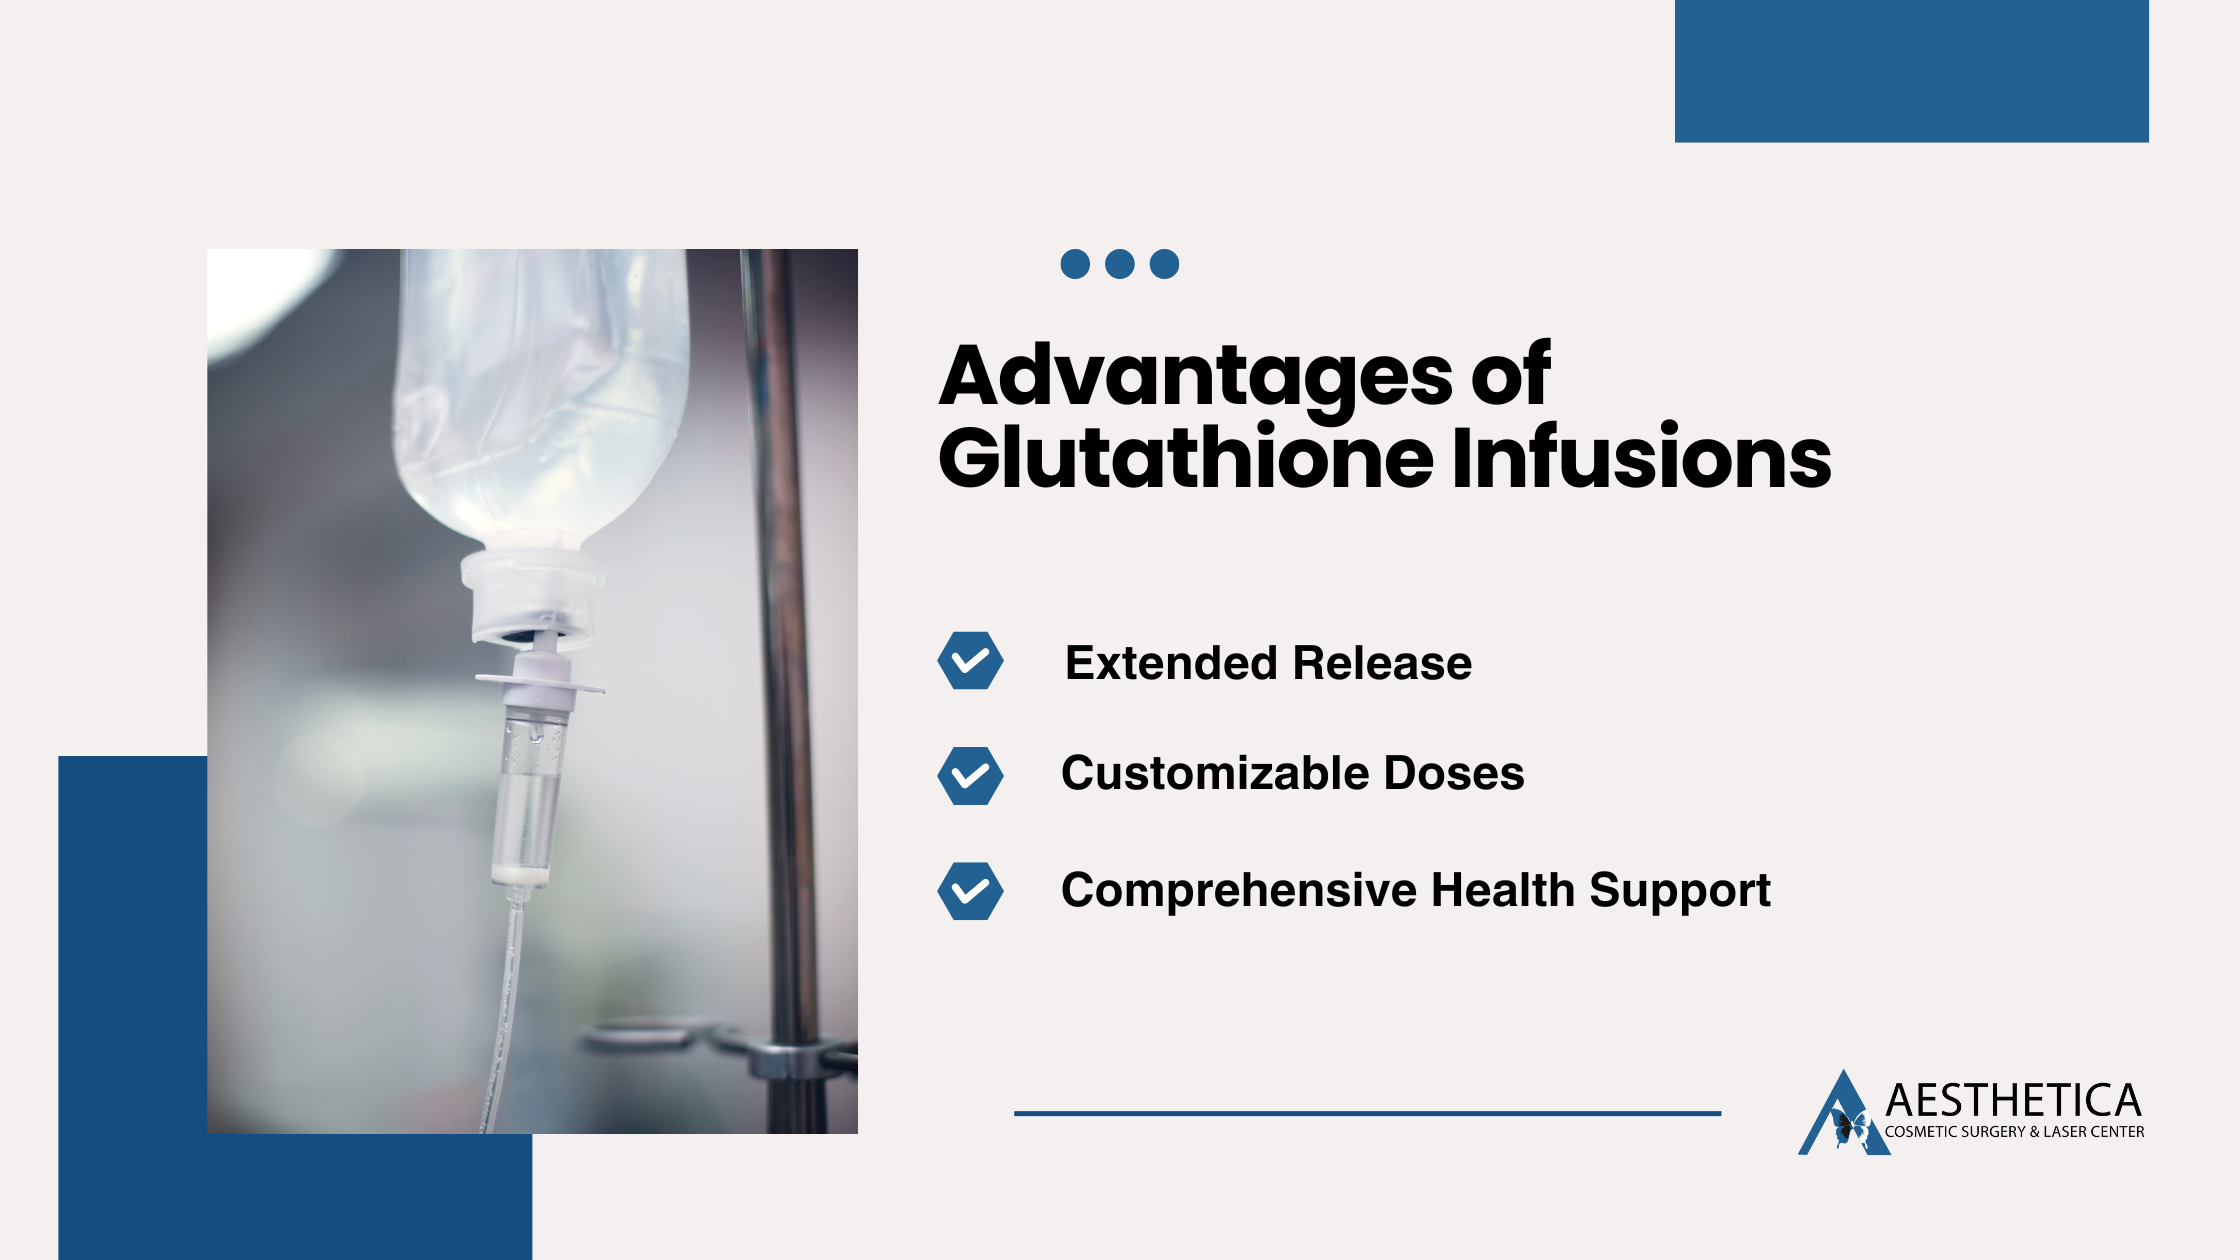 Advantages of Glutathione Infusions